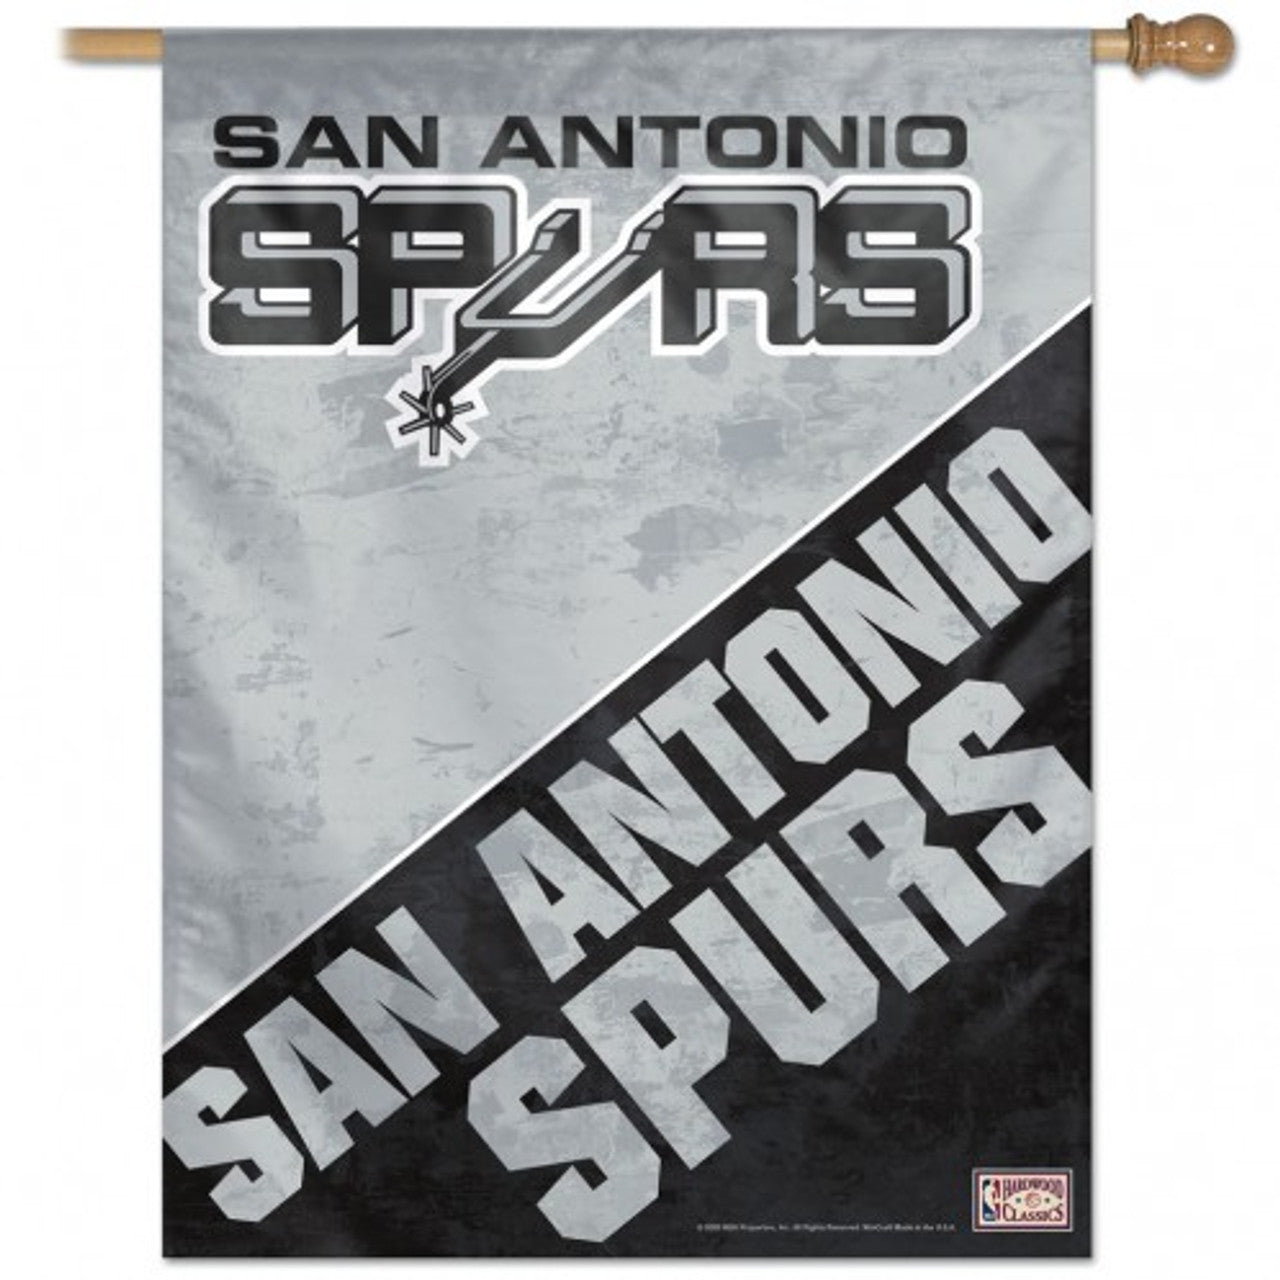 San Antonio Spurs 28" x 40" Vertical House Flag/Banner by Wincraft